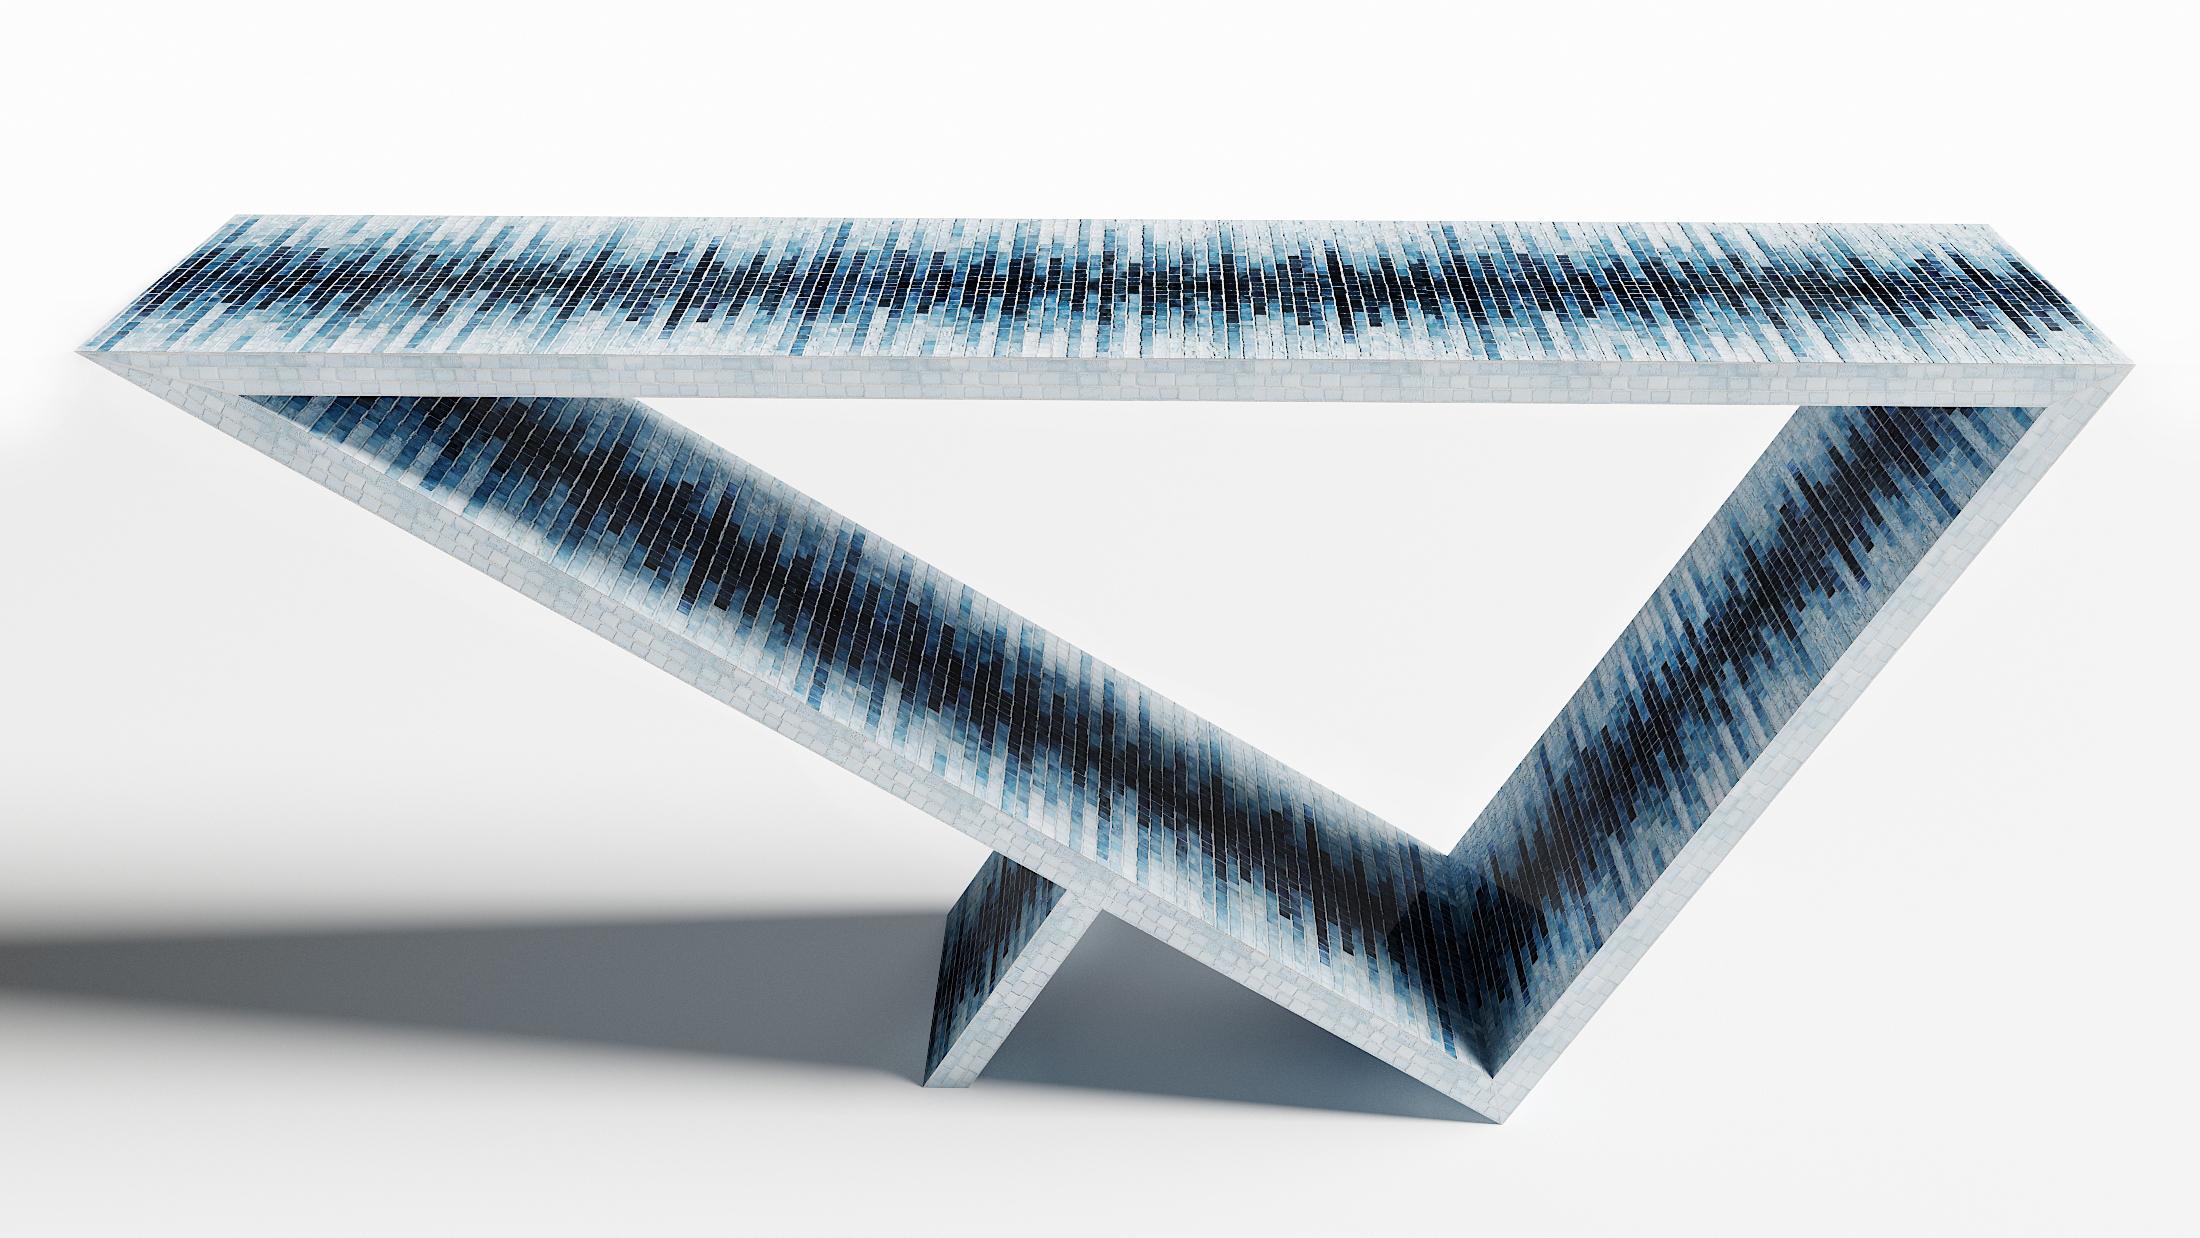 Time/space portal blue ombre console #4 by Neal Aronowitz Design
Dimensions: D 172.7 x W 43.2 x H 76.2 cm
Materials: Glass tile mosaic.
This table can be fabricated in any custom mosaic color and pattern. Also available in different sizes.